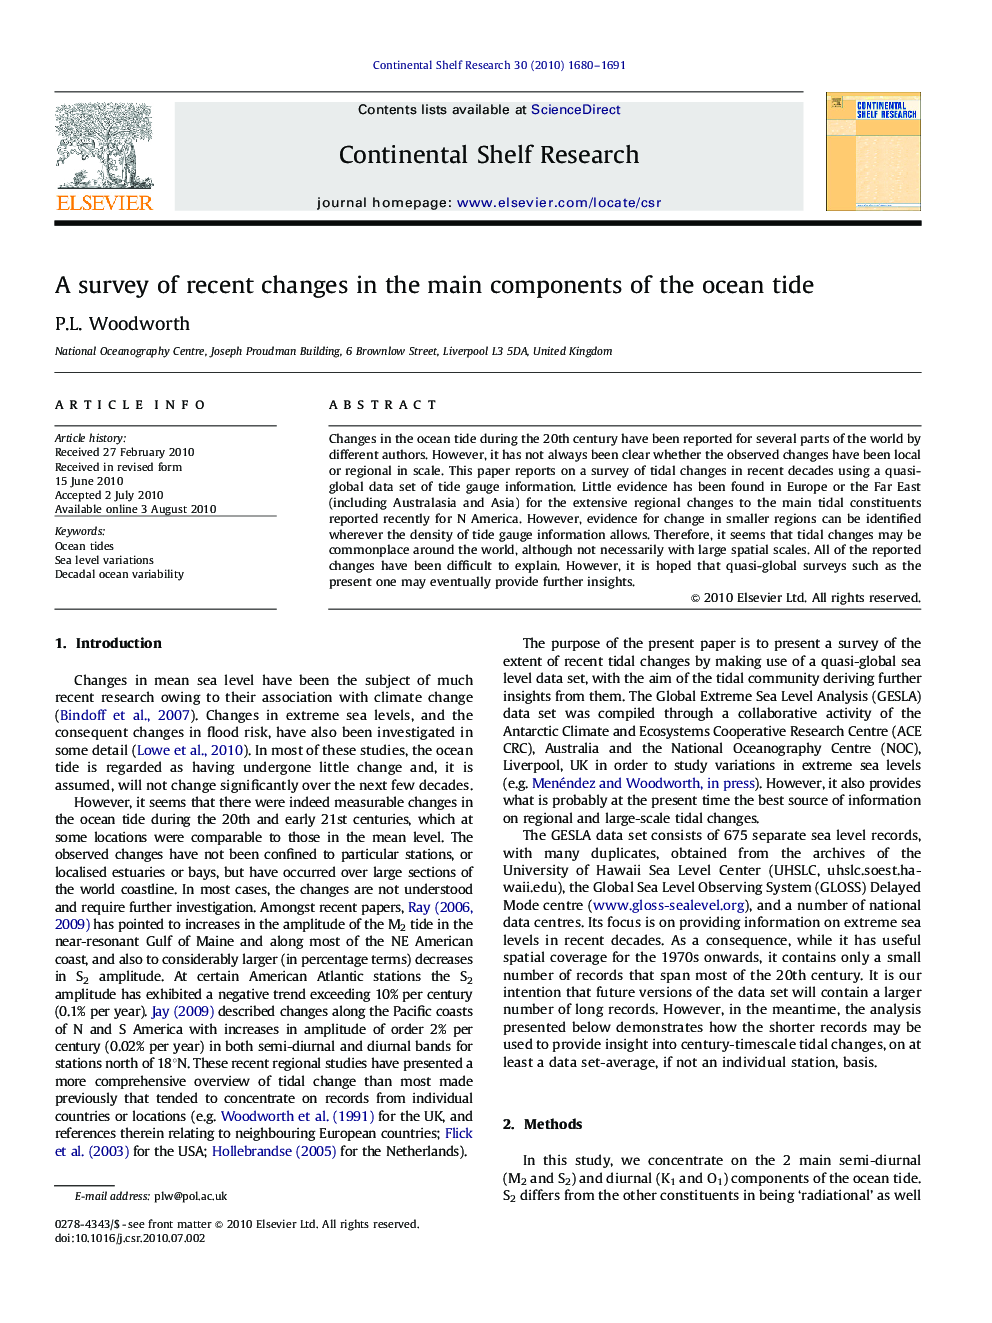 A survey of recent changes in the main components of the ocean tide